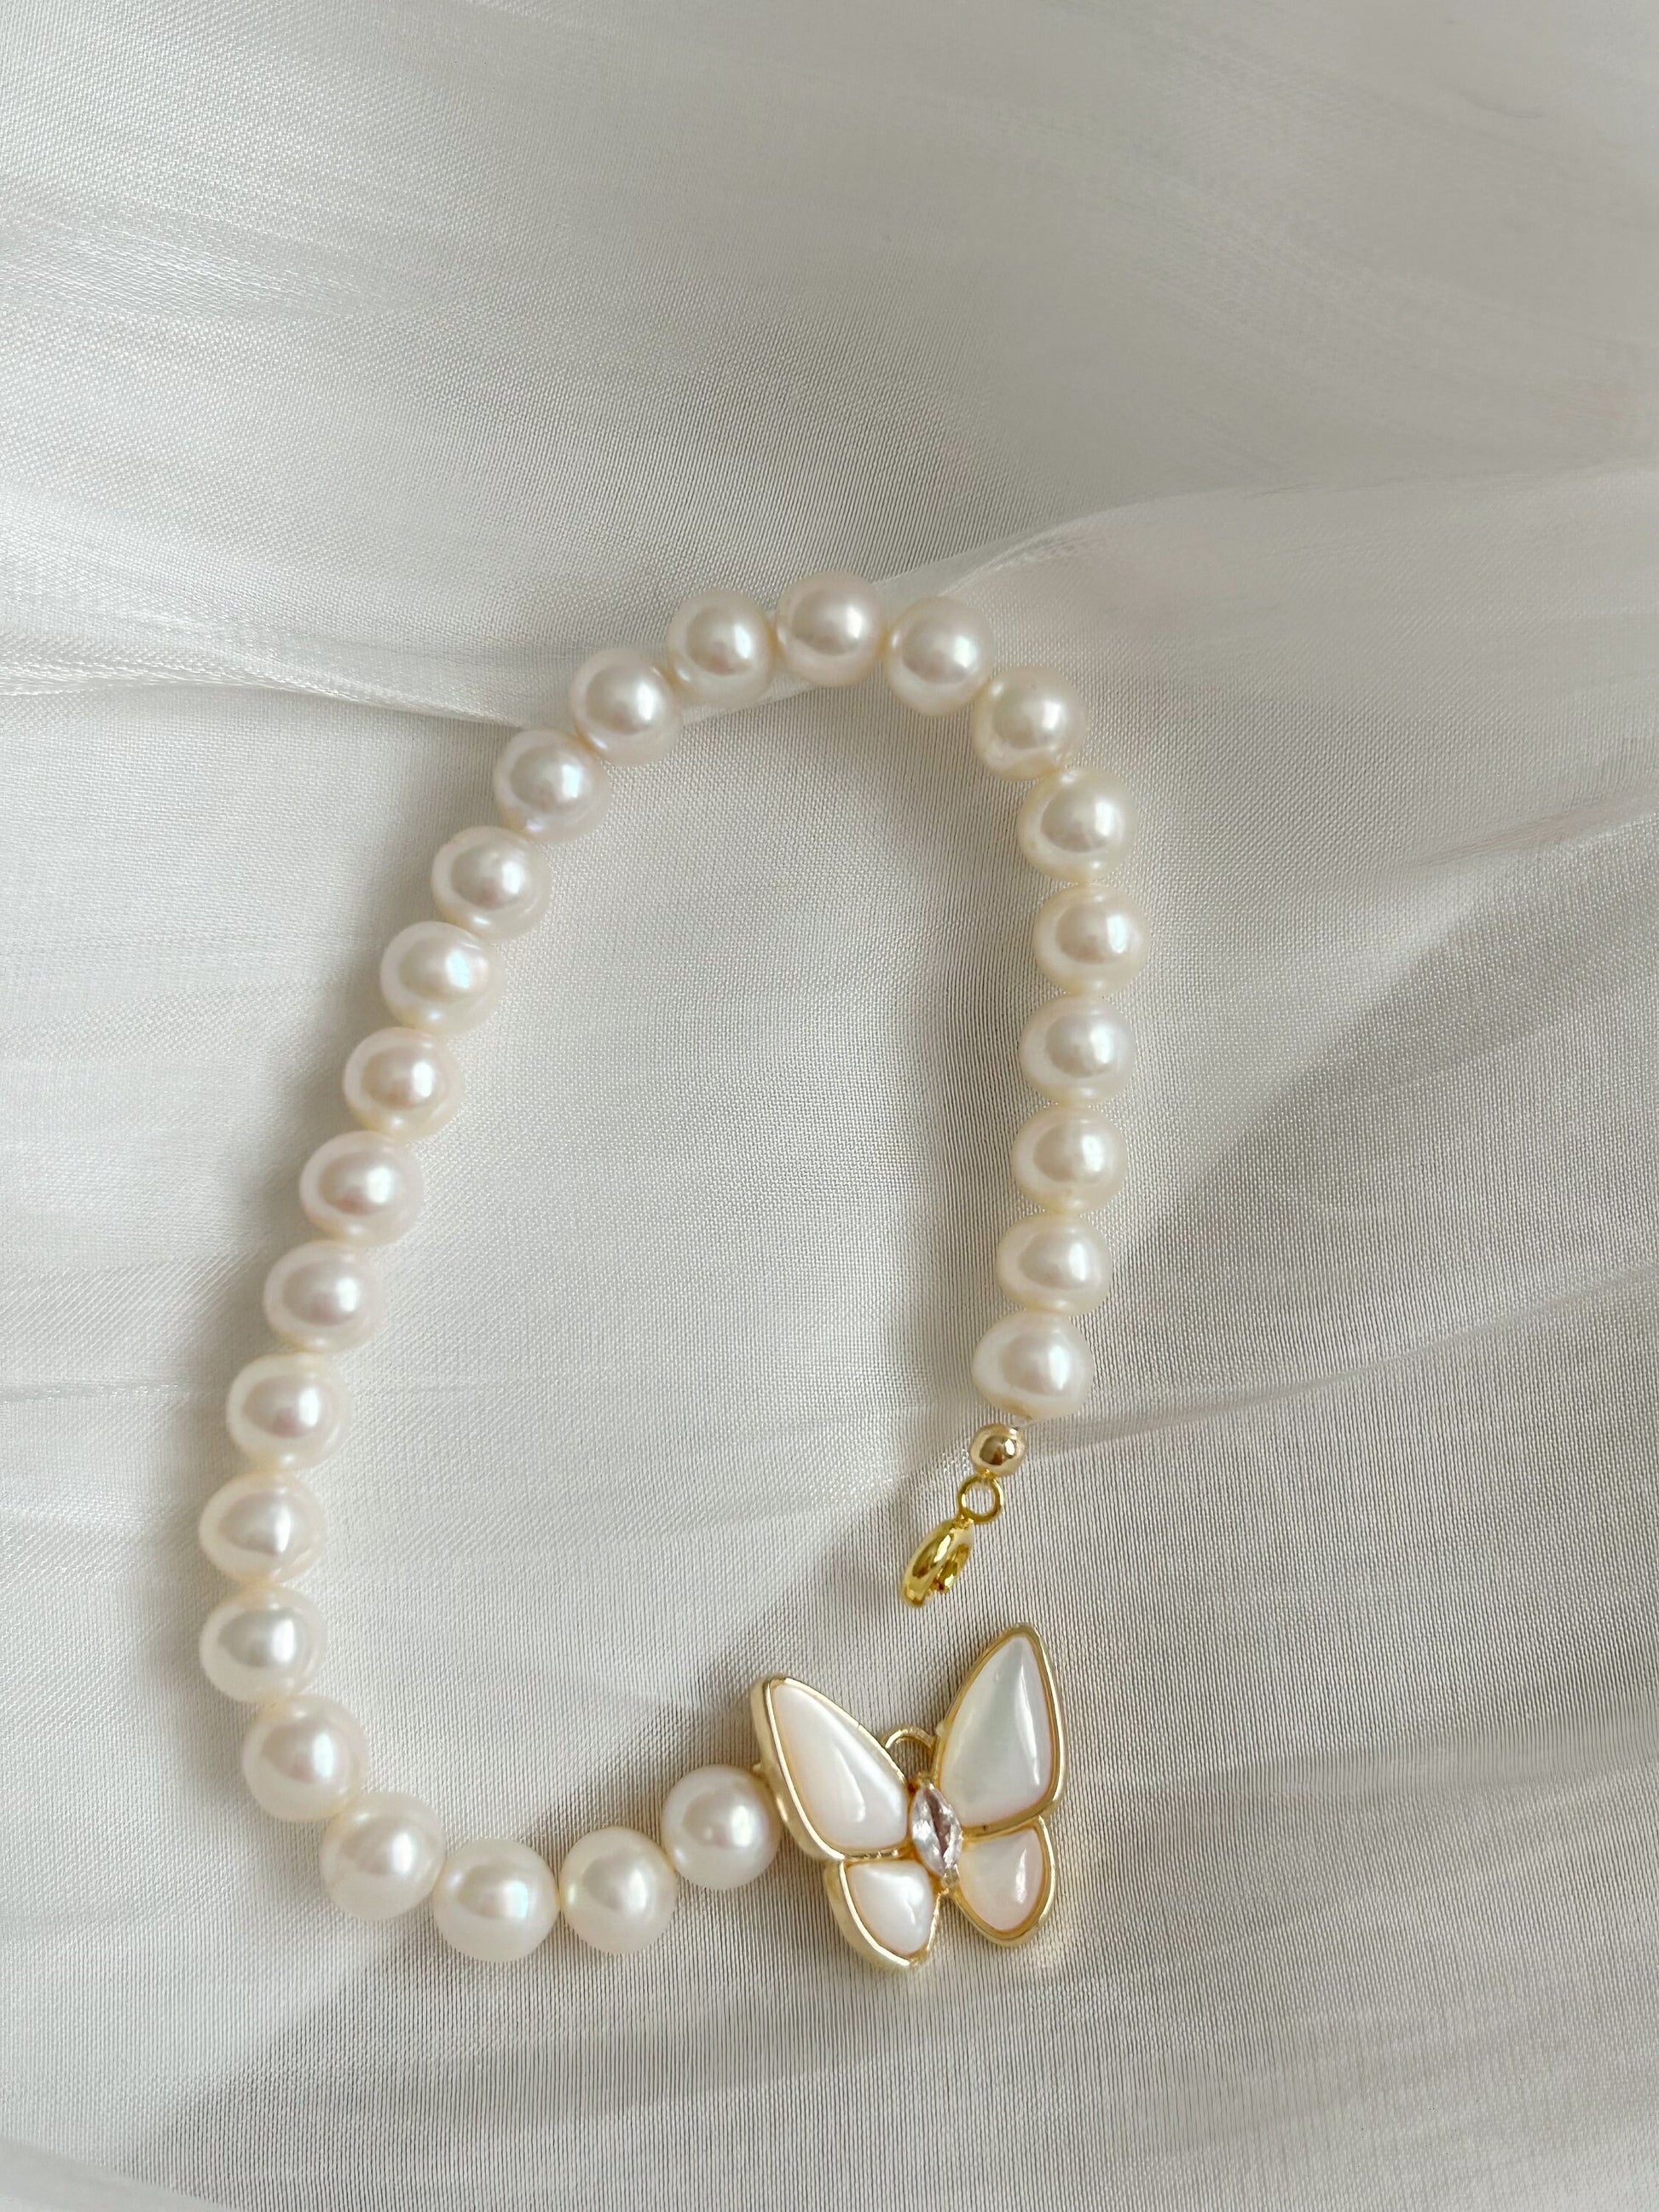 Mother pearl butterfly freshwater Pearl bracelets, 5-6mm near round freshwater Pearl bracelets, high luster pearls